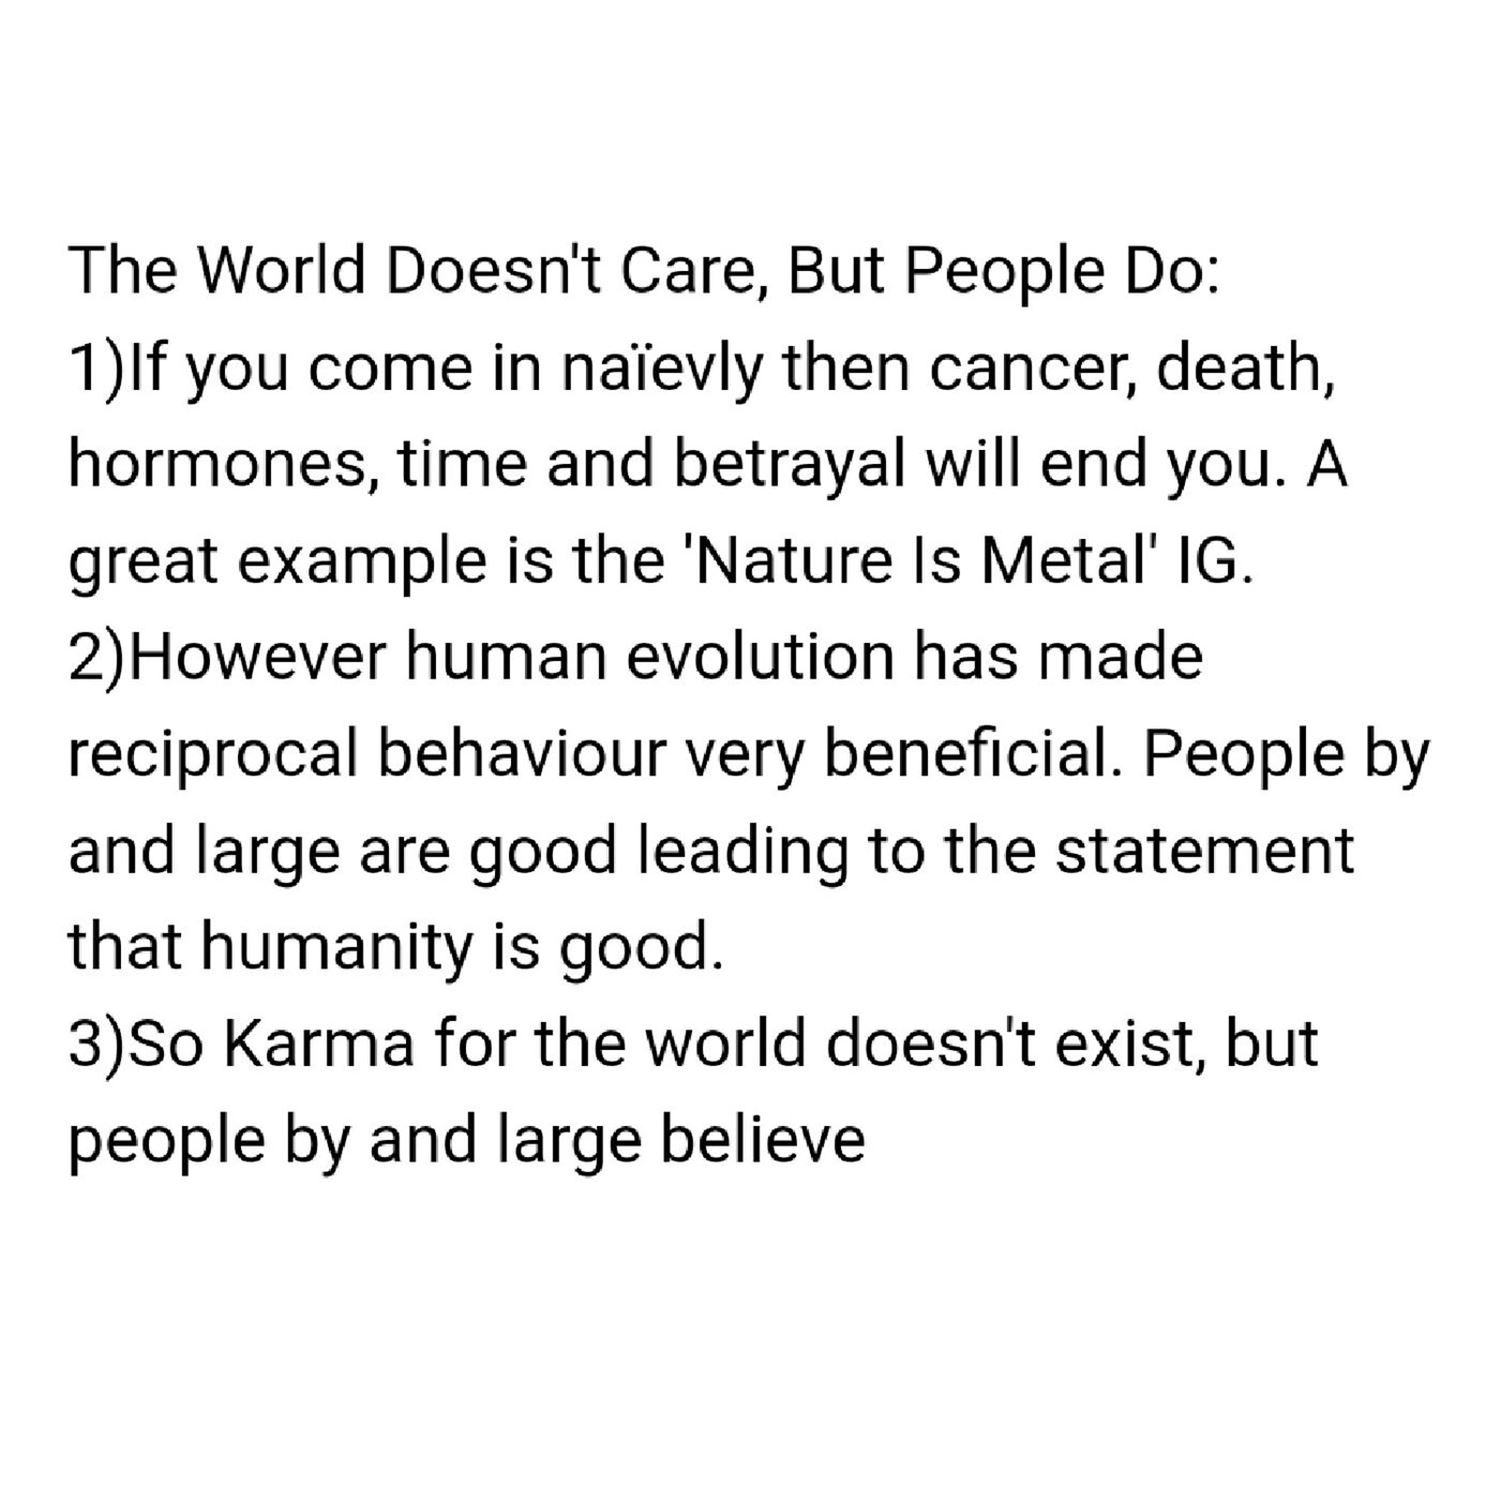 The world doesn't care, but people do